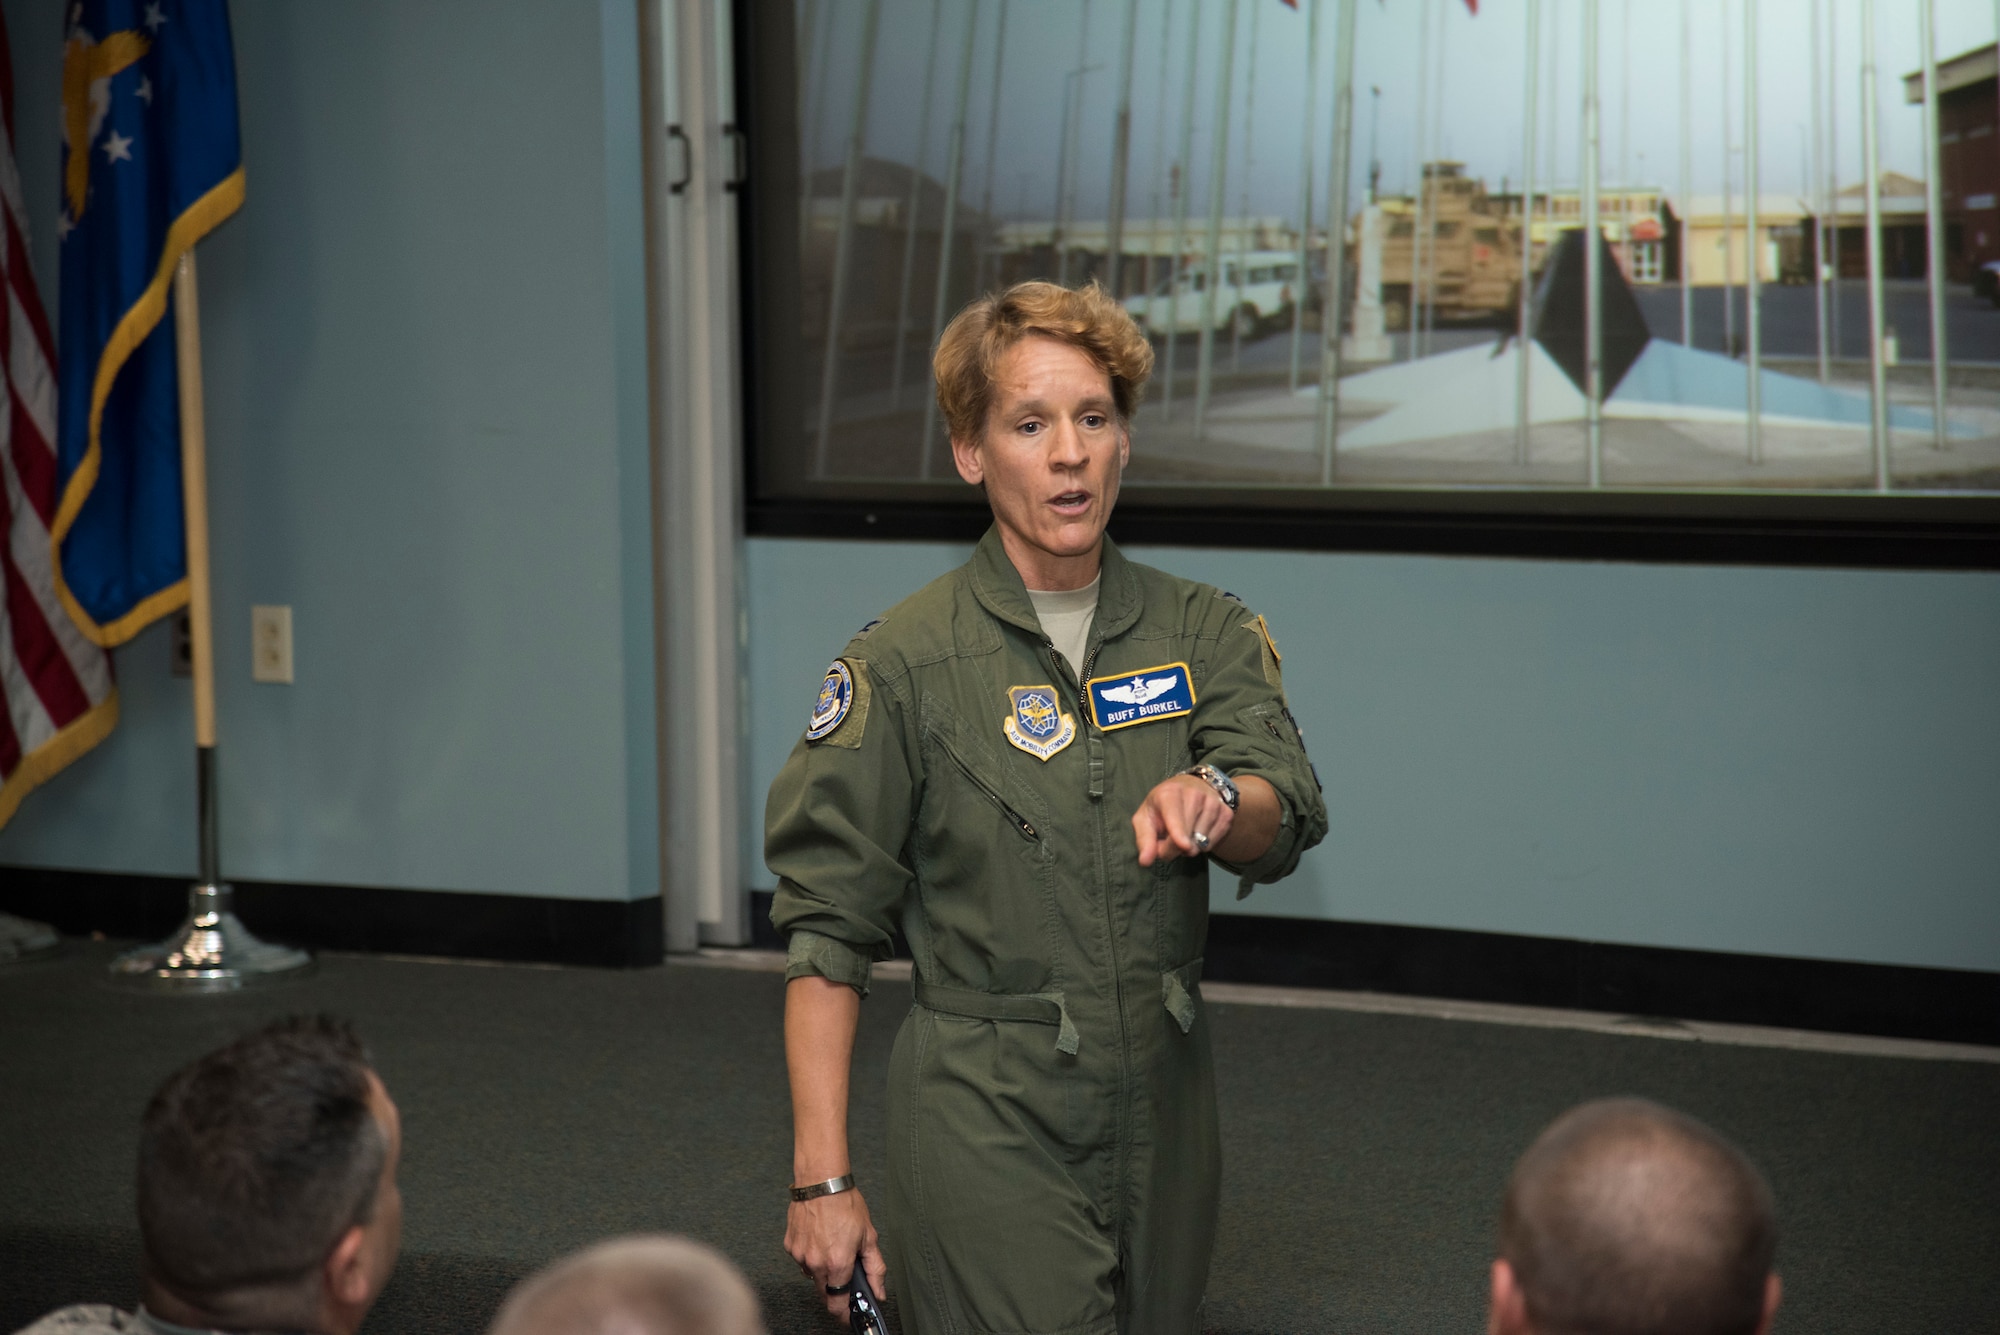 U.S. Air Force Col. Laurel “Buff” Burkel speaks to Airmen assigned to the 105th Airlift Wing at Stewart Air National Guard Base, N.Y., Aug. 4, 2018. Burkel was medically evacuated back to the U.S. on a 105th C-17 Globemaster III. (U.S. Air National Guard photo by Staff Sgt. Julio A. Olivencia Jr.)